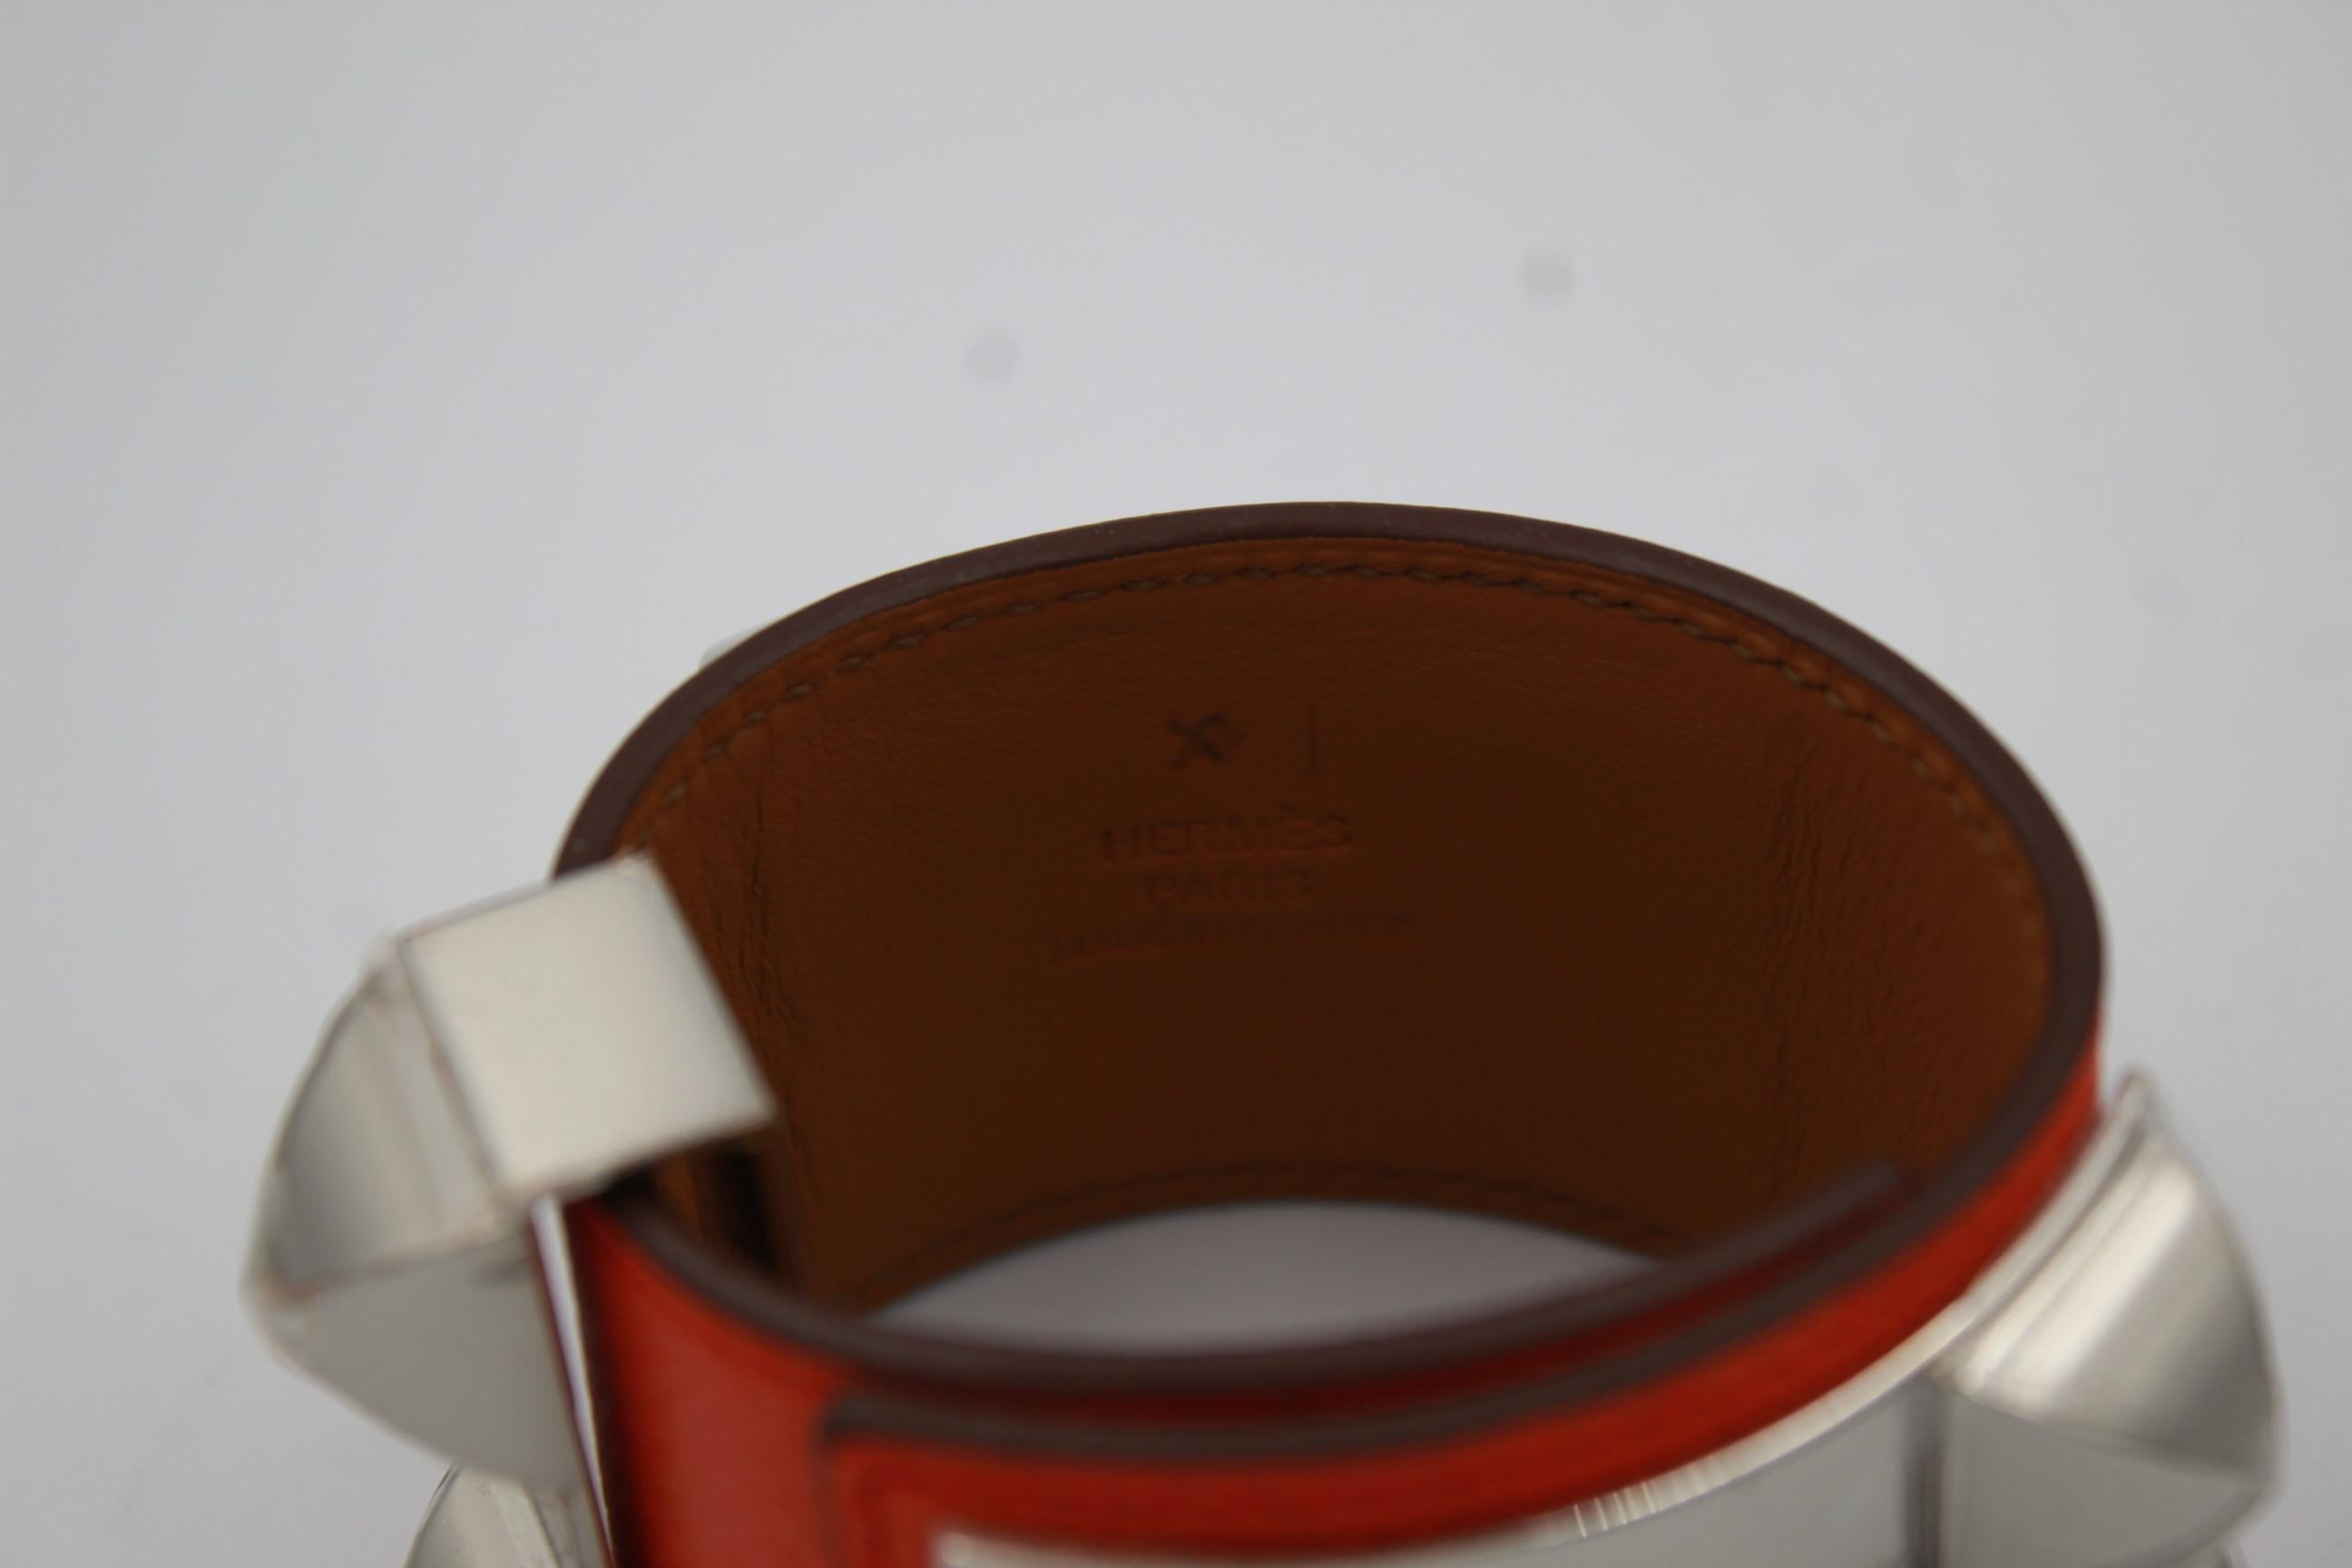 New never used Hermes Collier de Chien Bracelet in Orange Poppy Epsom leather and silver tone hardware.
Size XS ( maximum wrist 16 cm)
Still with some protective plastics.